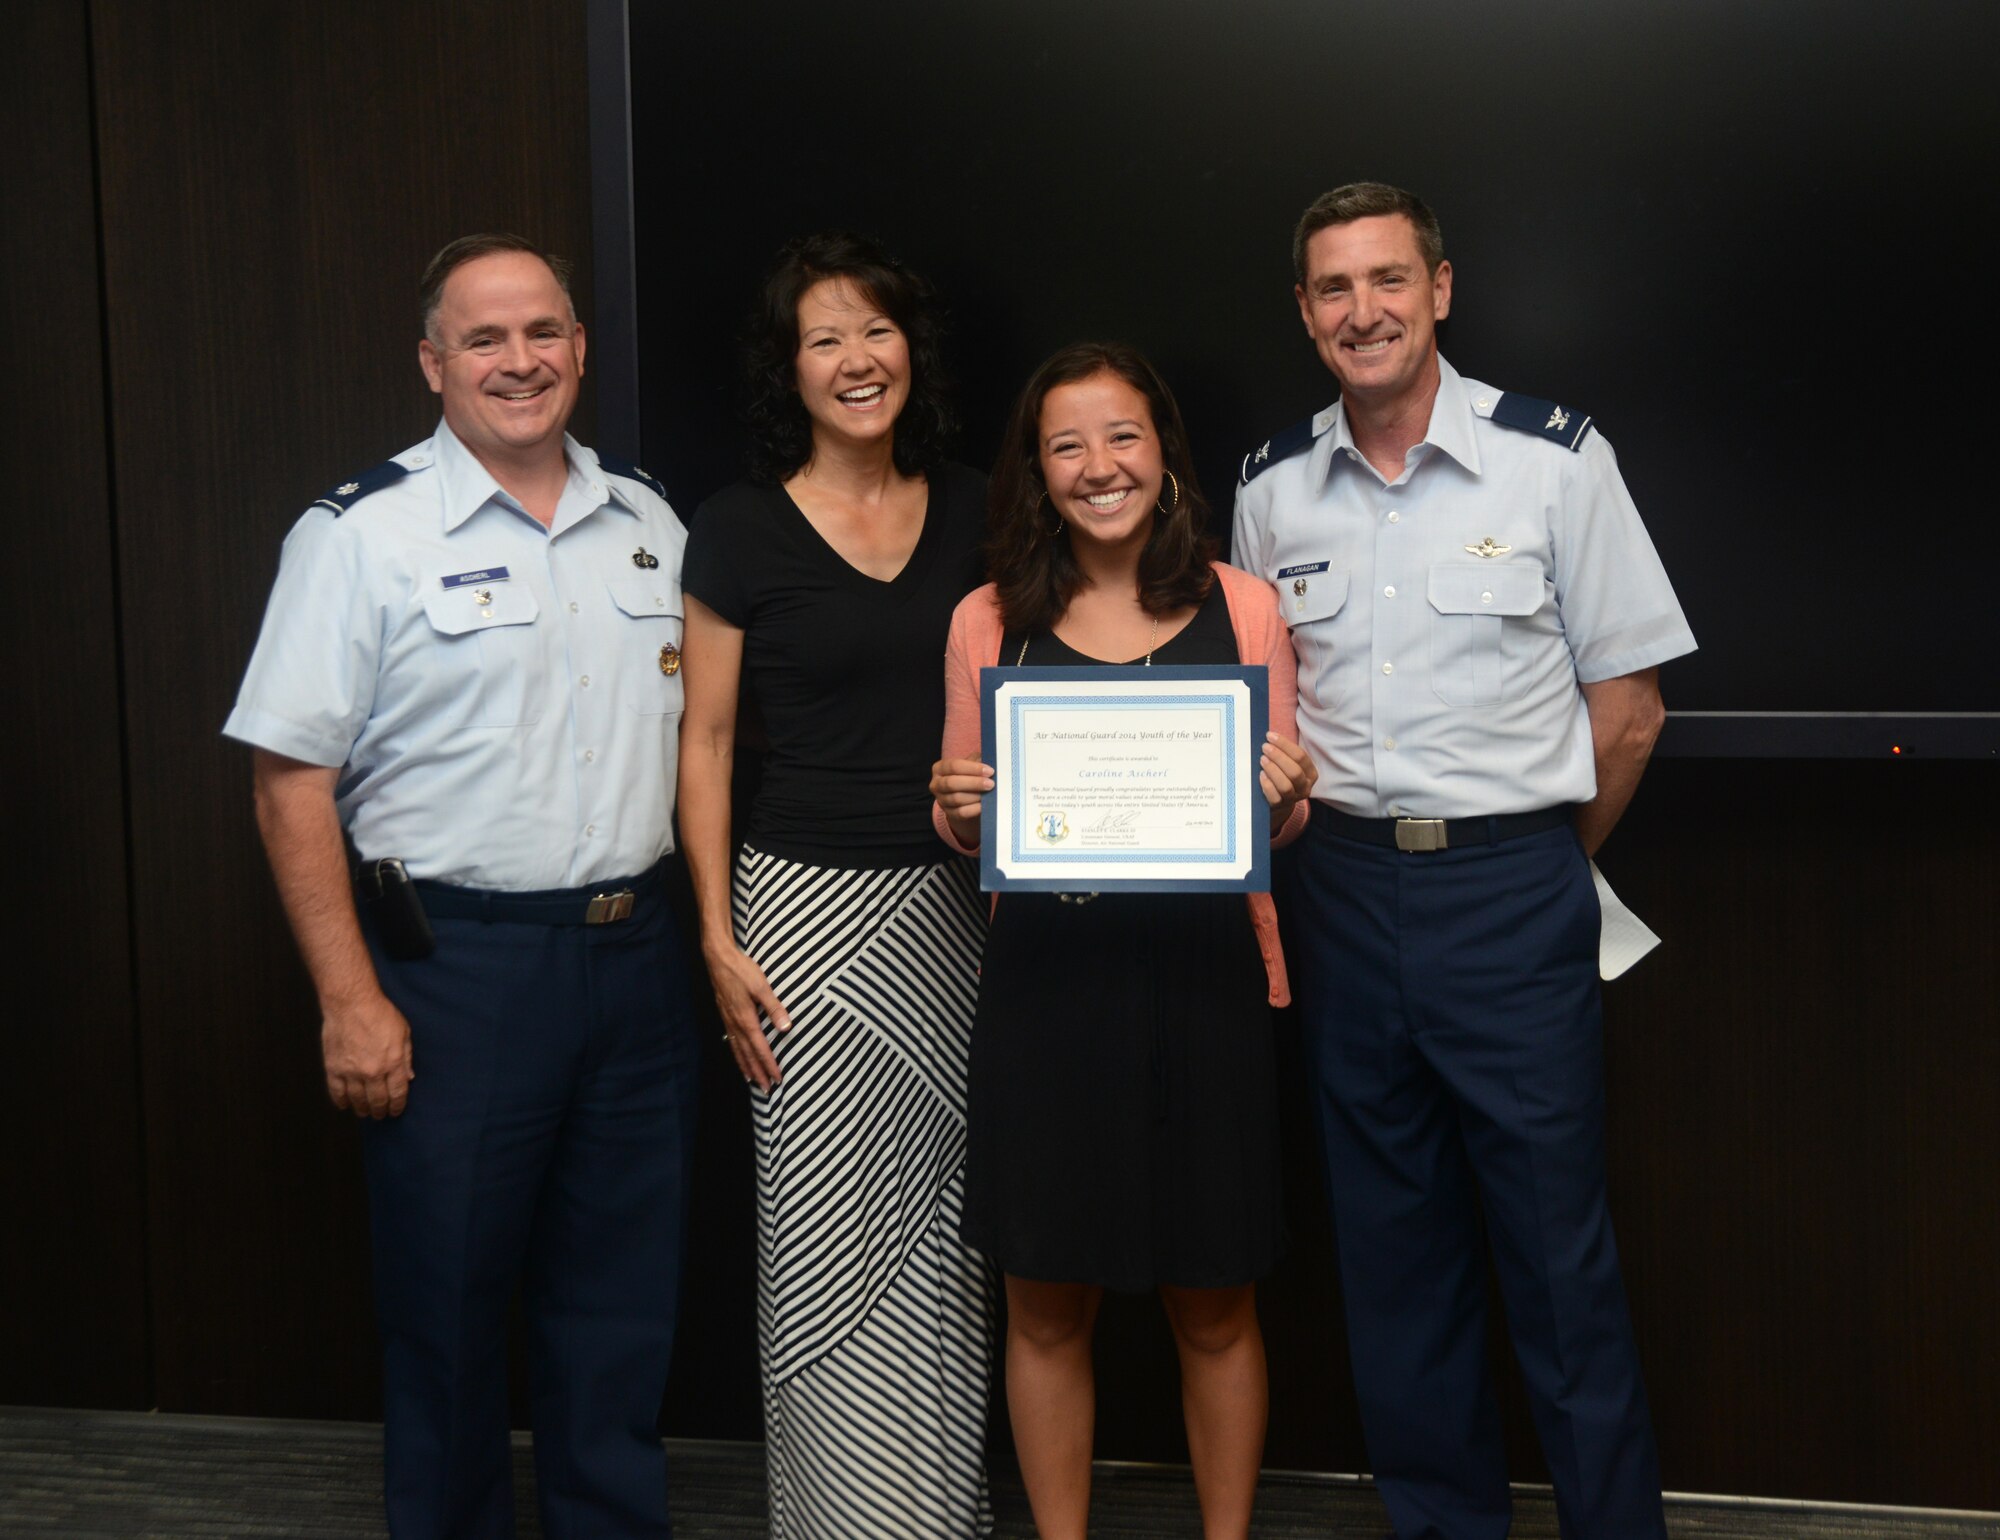 Col. Michael Flanagan, Air National Guard director of manpower, personnel and services, honors the Air National Guard 2014 Youth of the Year, Miss Caroline Ascherl with a certificate of recognition during a ceremony at the Air National Guard Readiness Center on Joint Base Andrews, Md., July 9, 2014. (U.S. Air National Guard photo by Senior Airman John E. Hillier/Released)